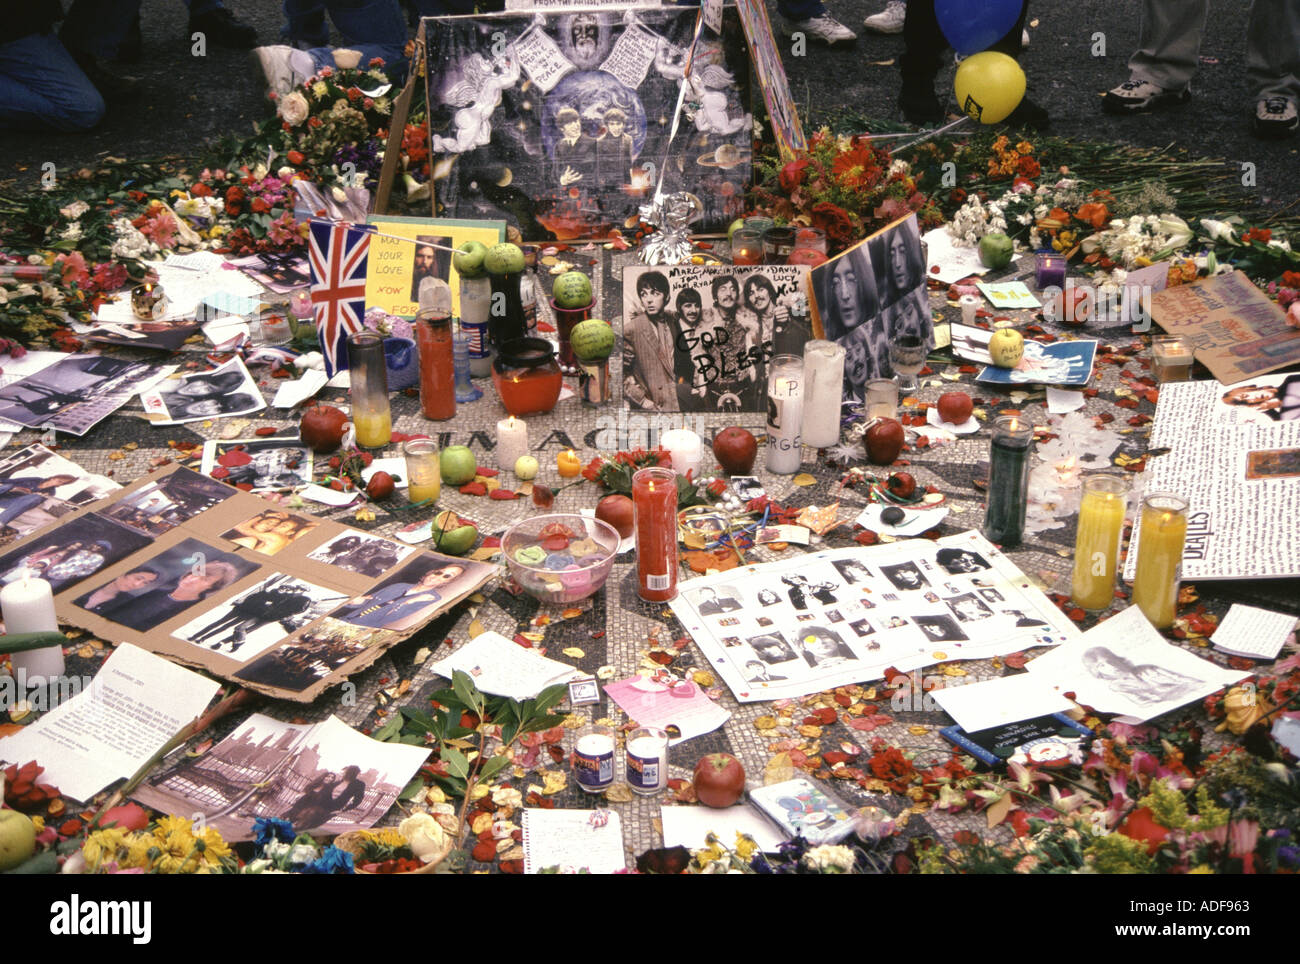 George Harrison memorial at Strawberry Fields in New York after his death in 2001 Stock Photo